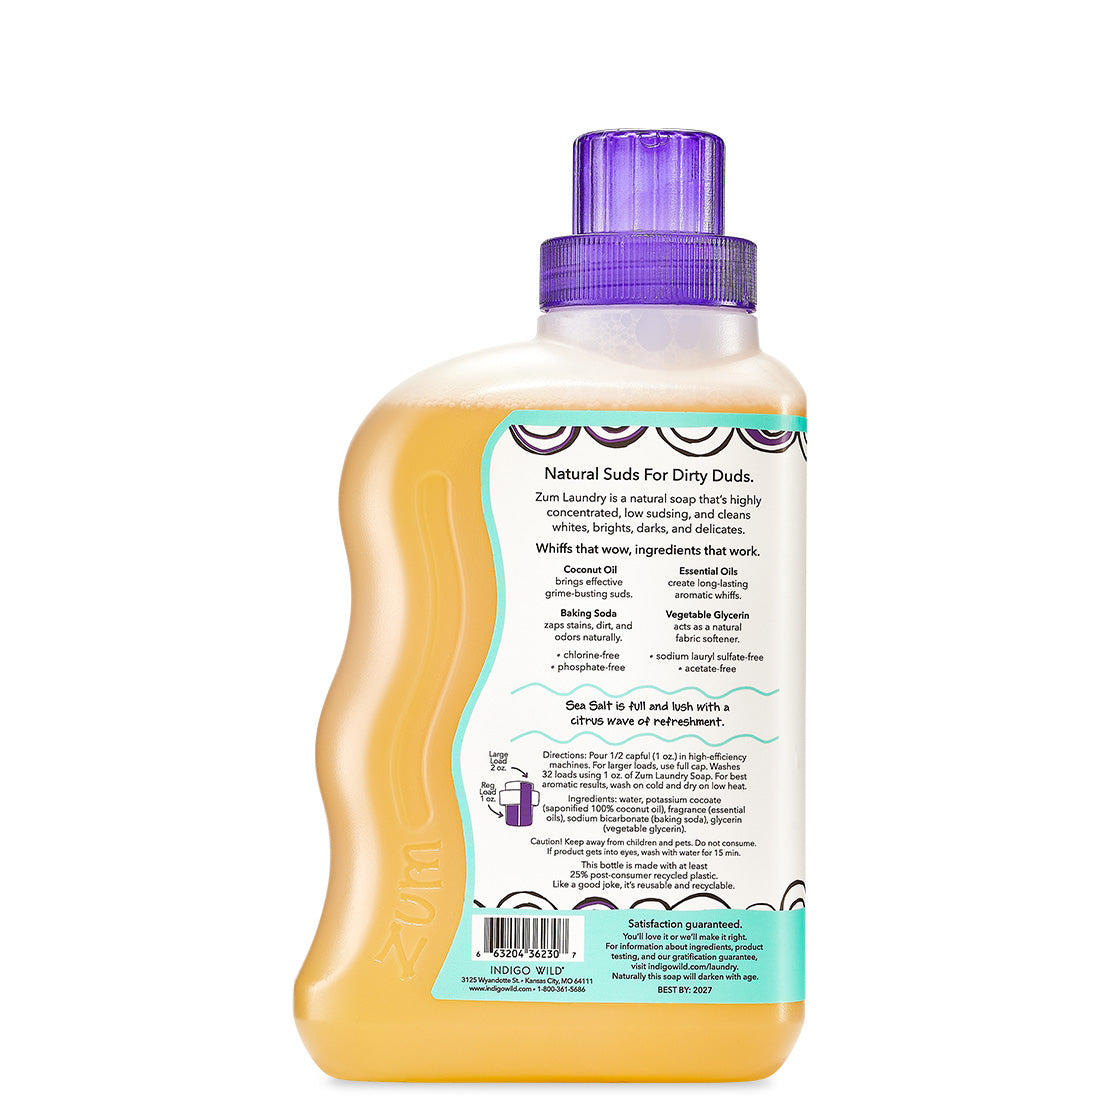 Back view of small bottle with wavy edge that contains Sea Salt Zum Laundry Soap